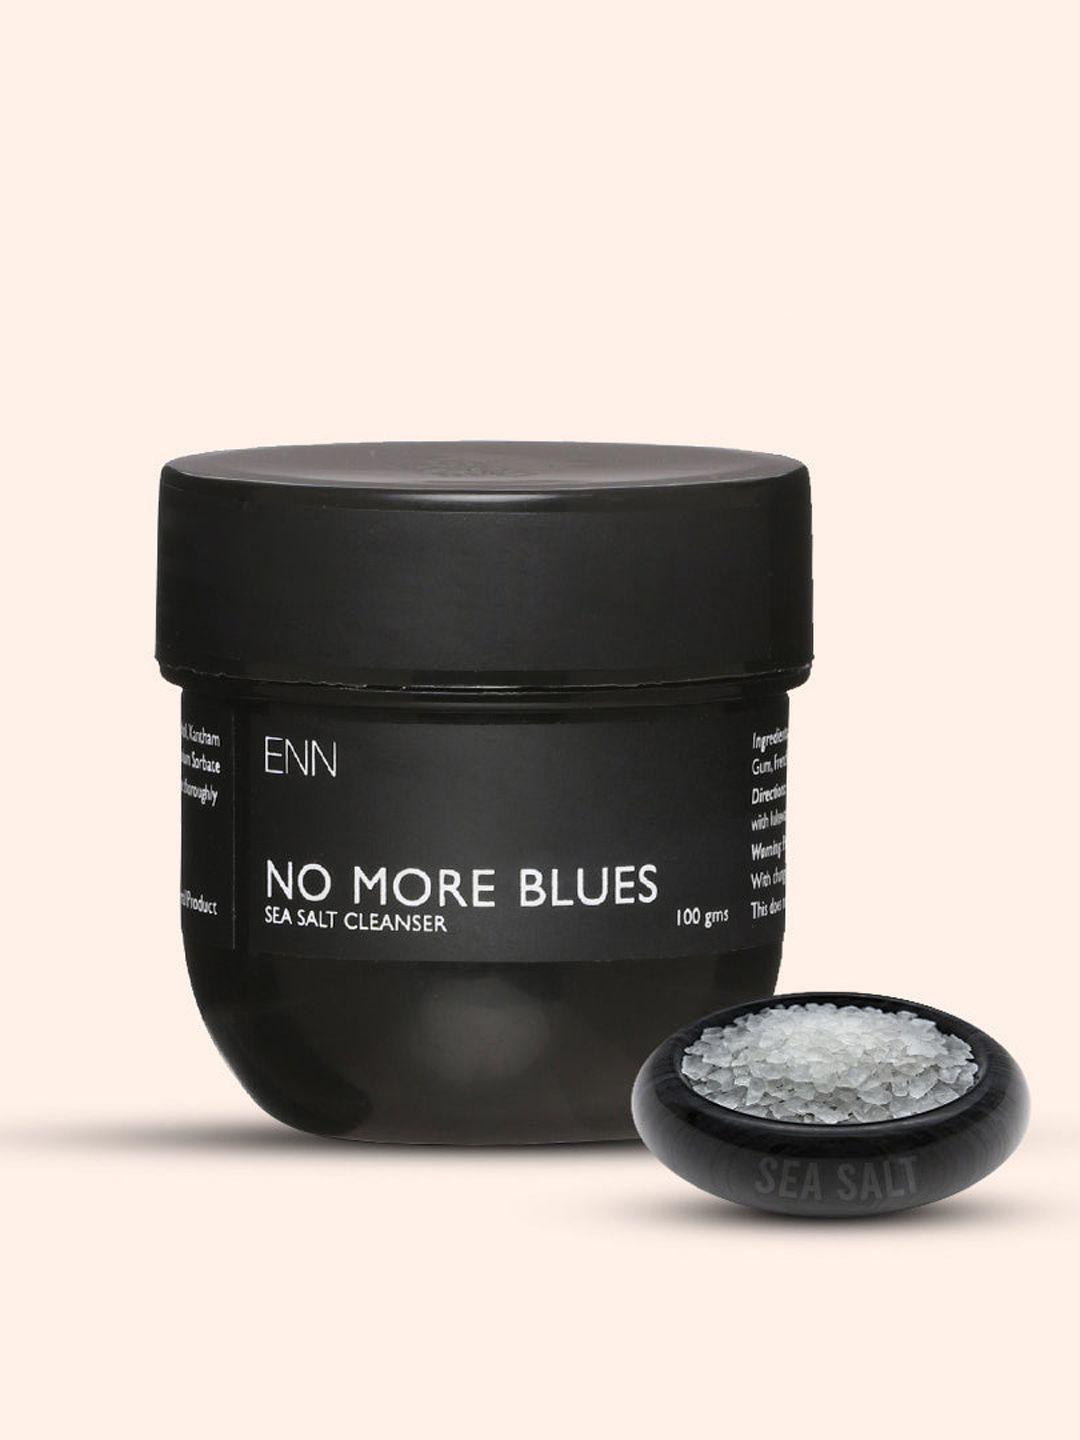 enn no more blues oil-control sea salt face cleanser with seaweed extract - 100 g